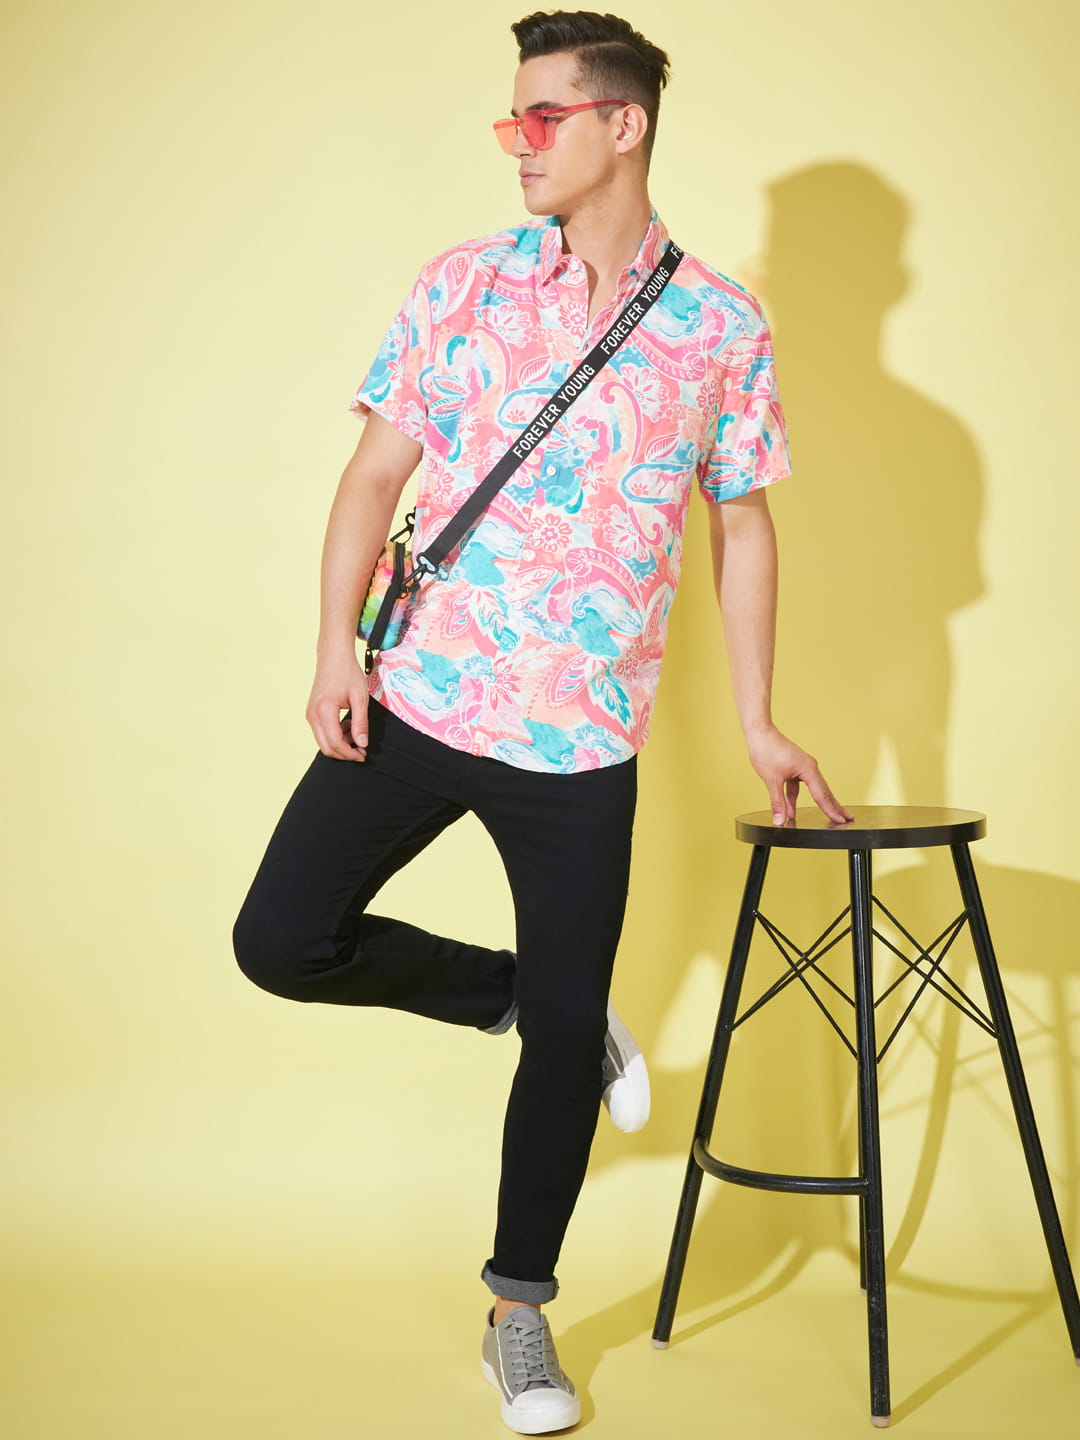 Rosy Delight: Pink Printed Men's Shirt